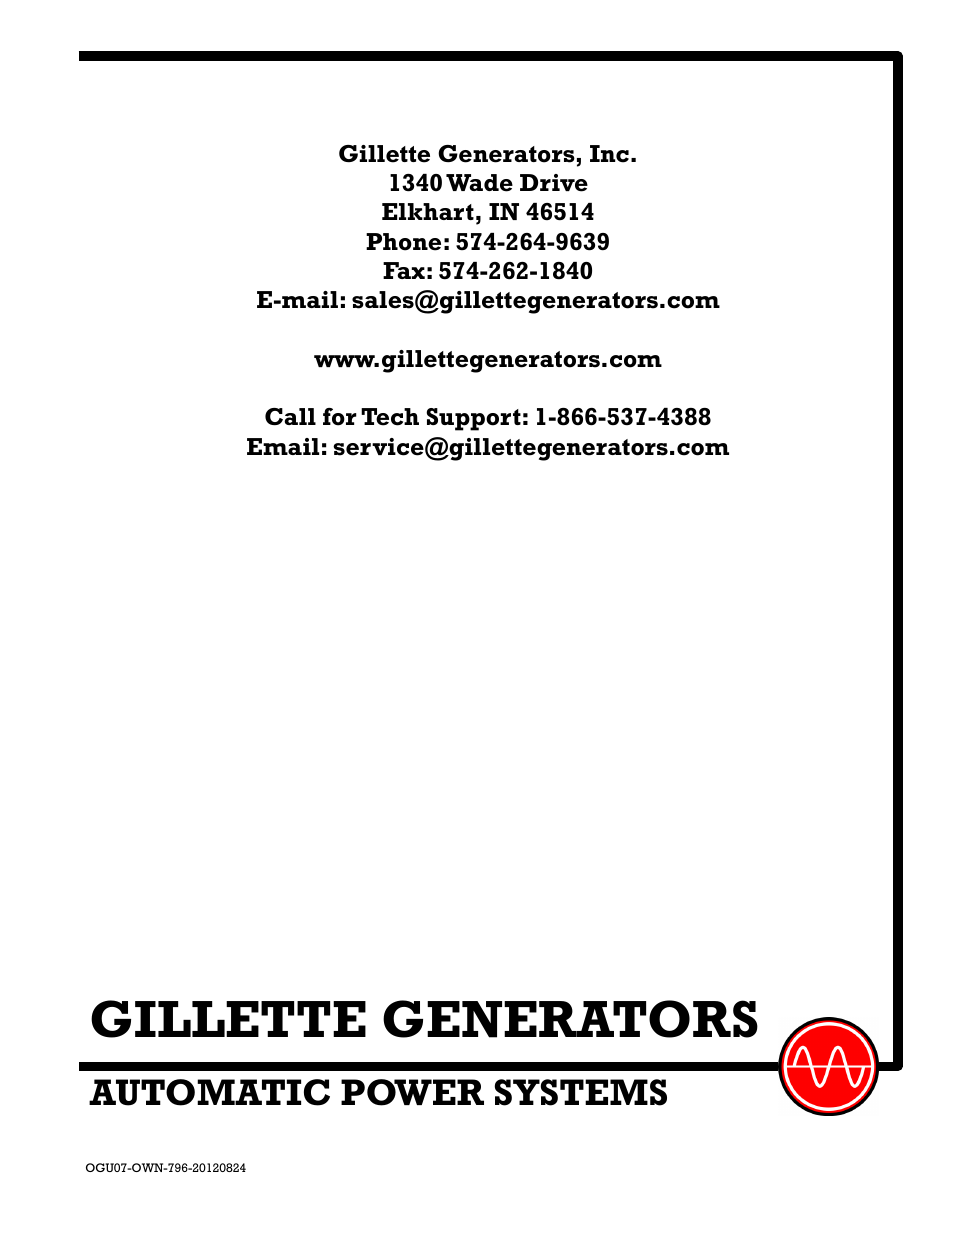 Gillette generators, Automatic power systems | Gillette Generators SPMD-2500 THRU SPMD-4000 User Manual | Page 27 / 27